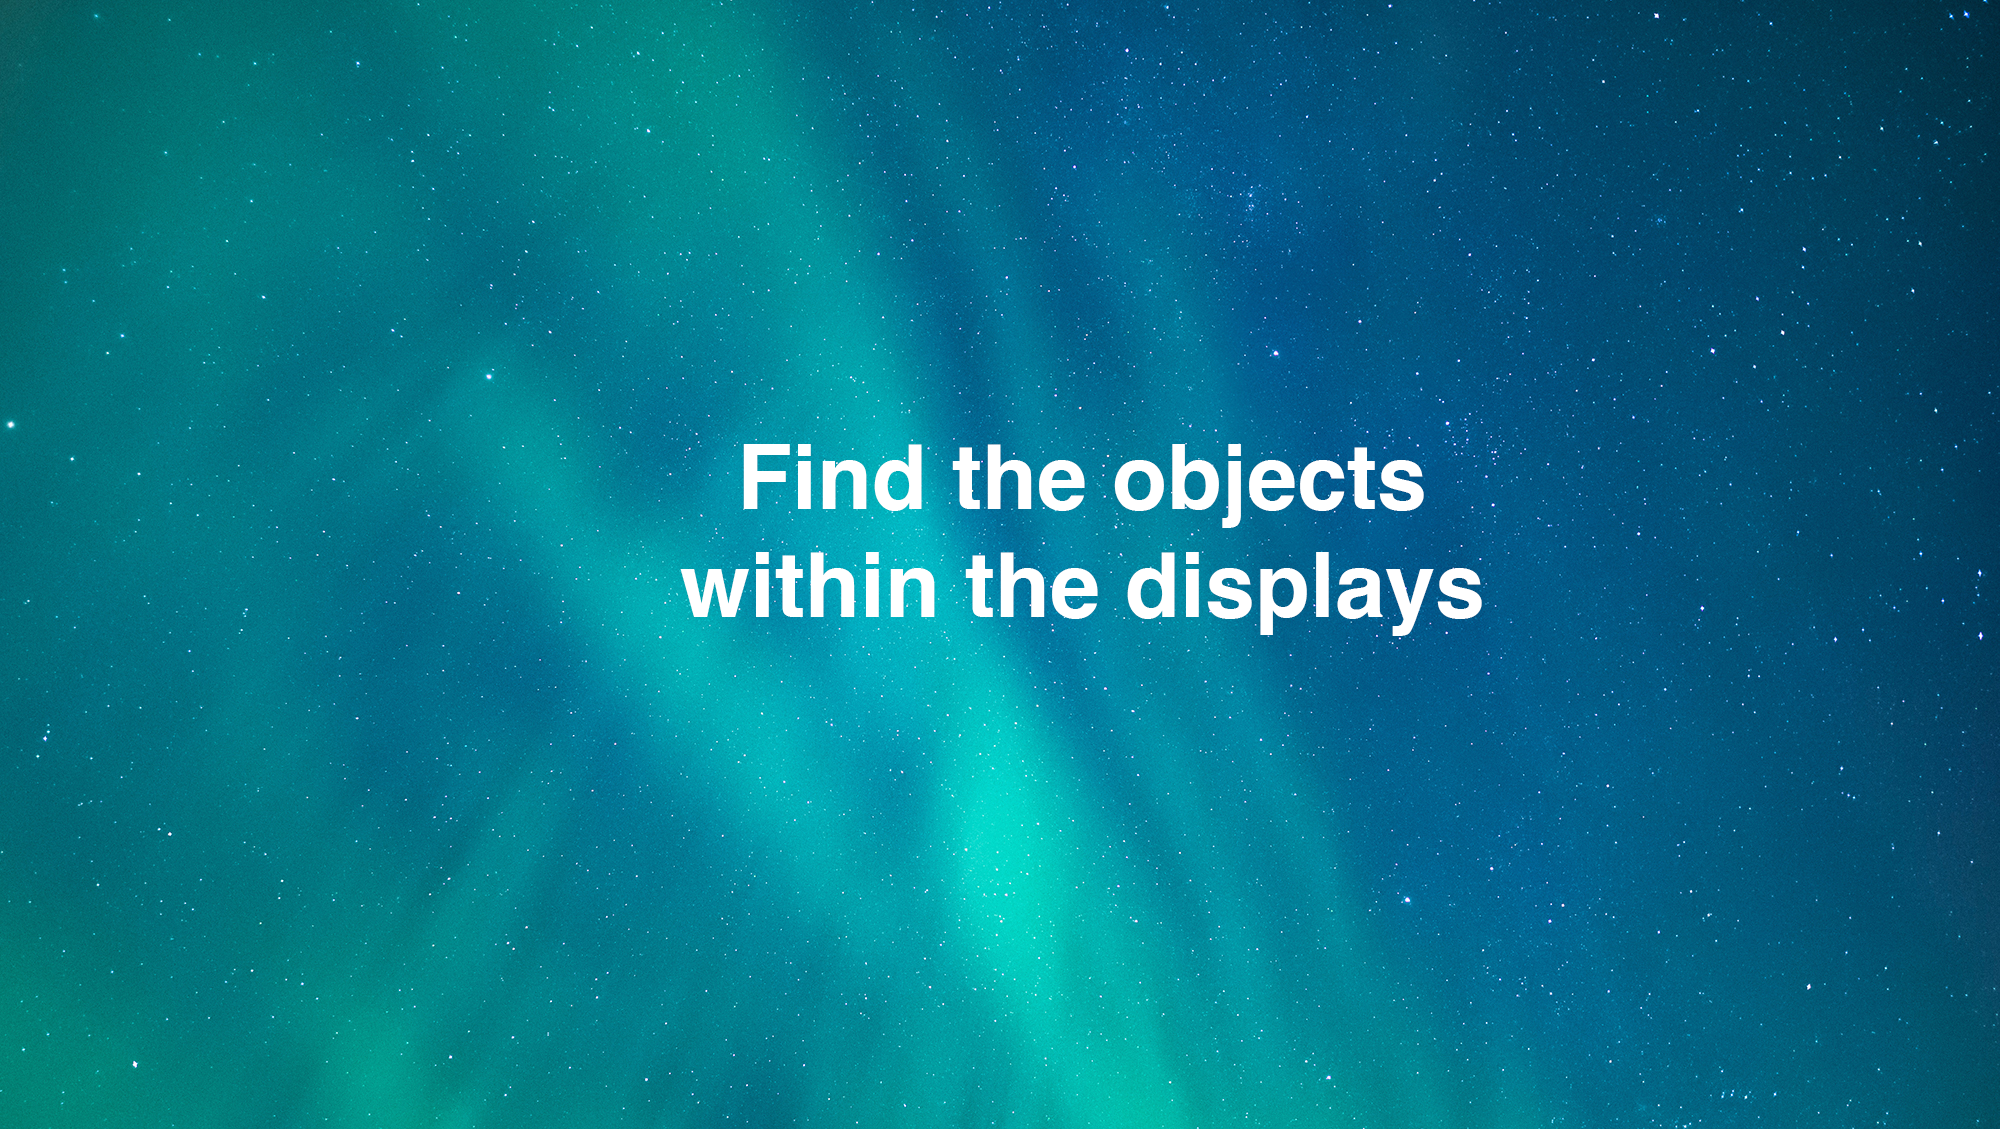 White text saying "find the objects within the displays" over an image of a starry sky